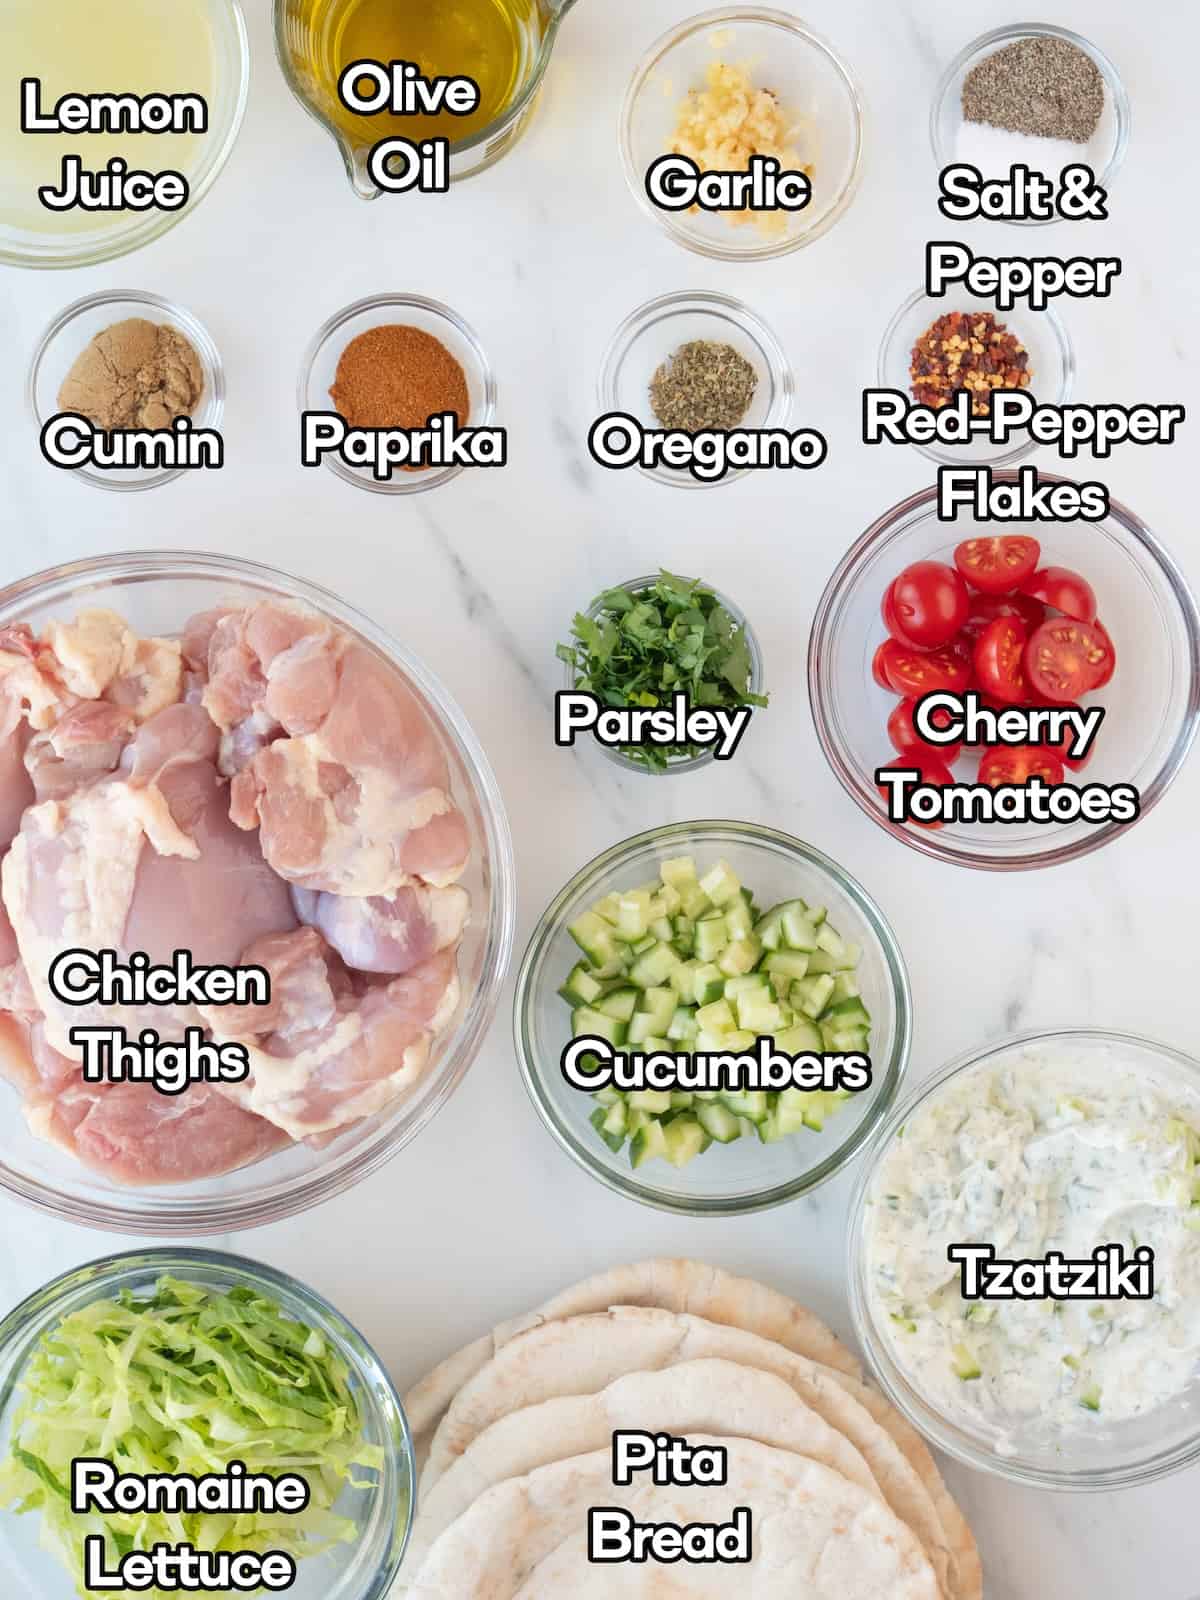 Mise en place of all ingredients to make chicken gyros.